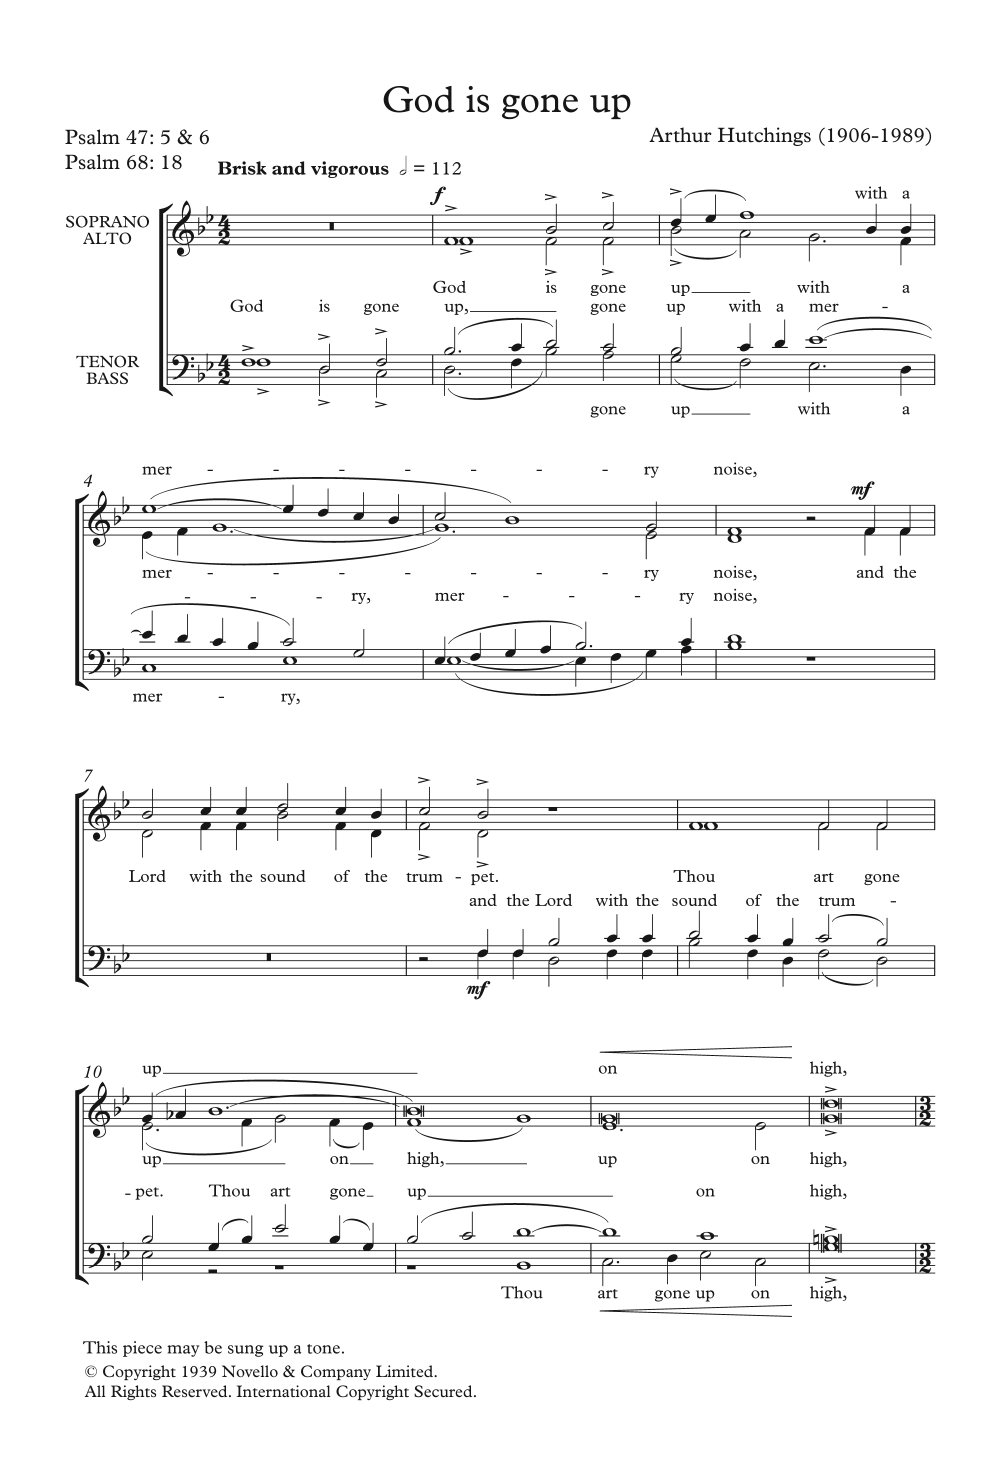 Download Arthur Hutchings God Is Gone Up Sheet Music